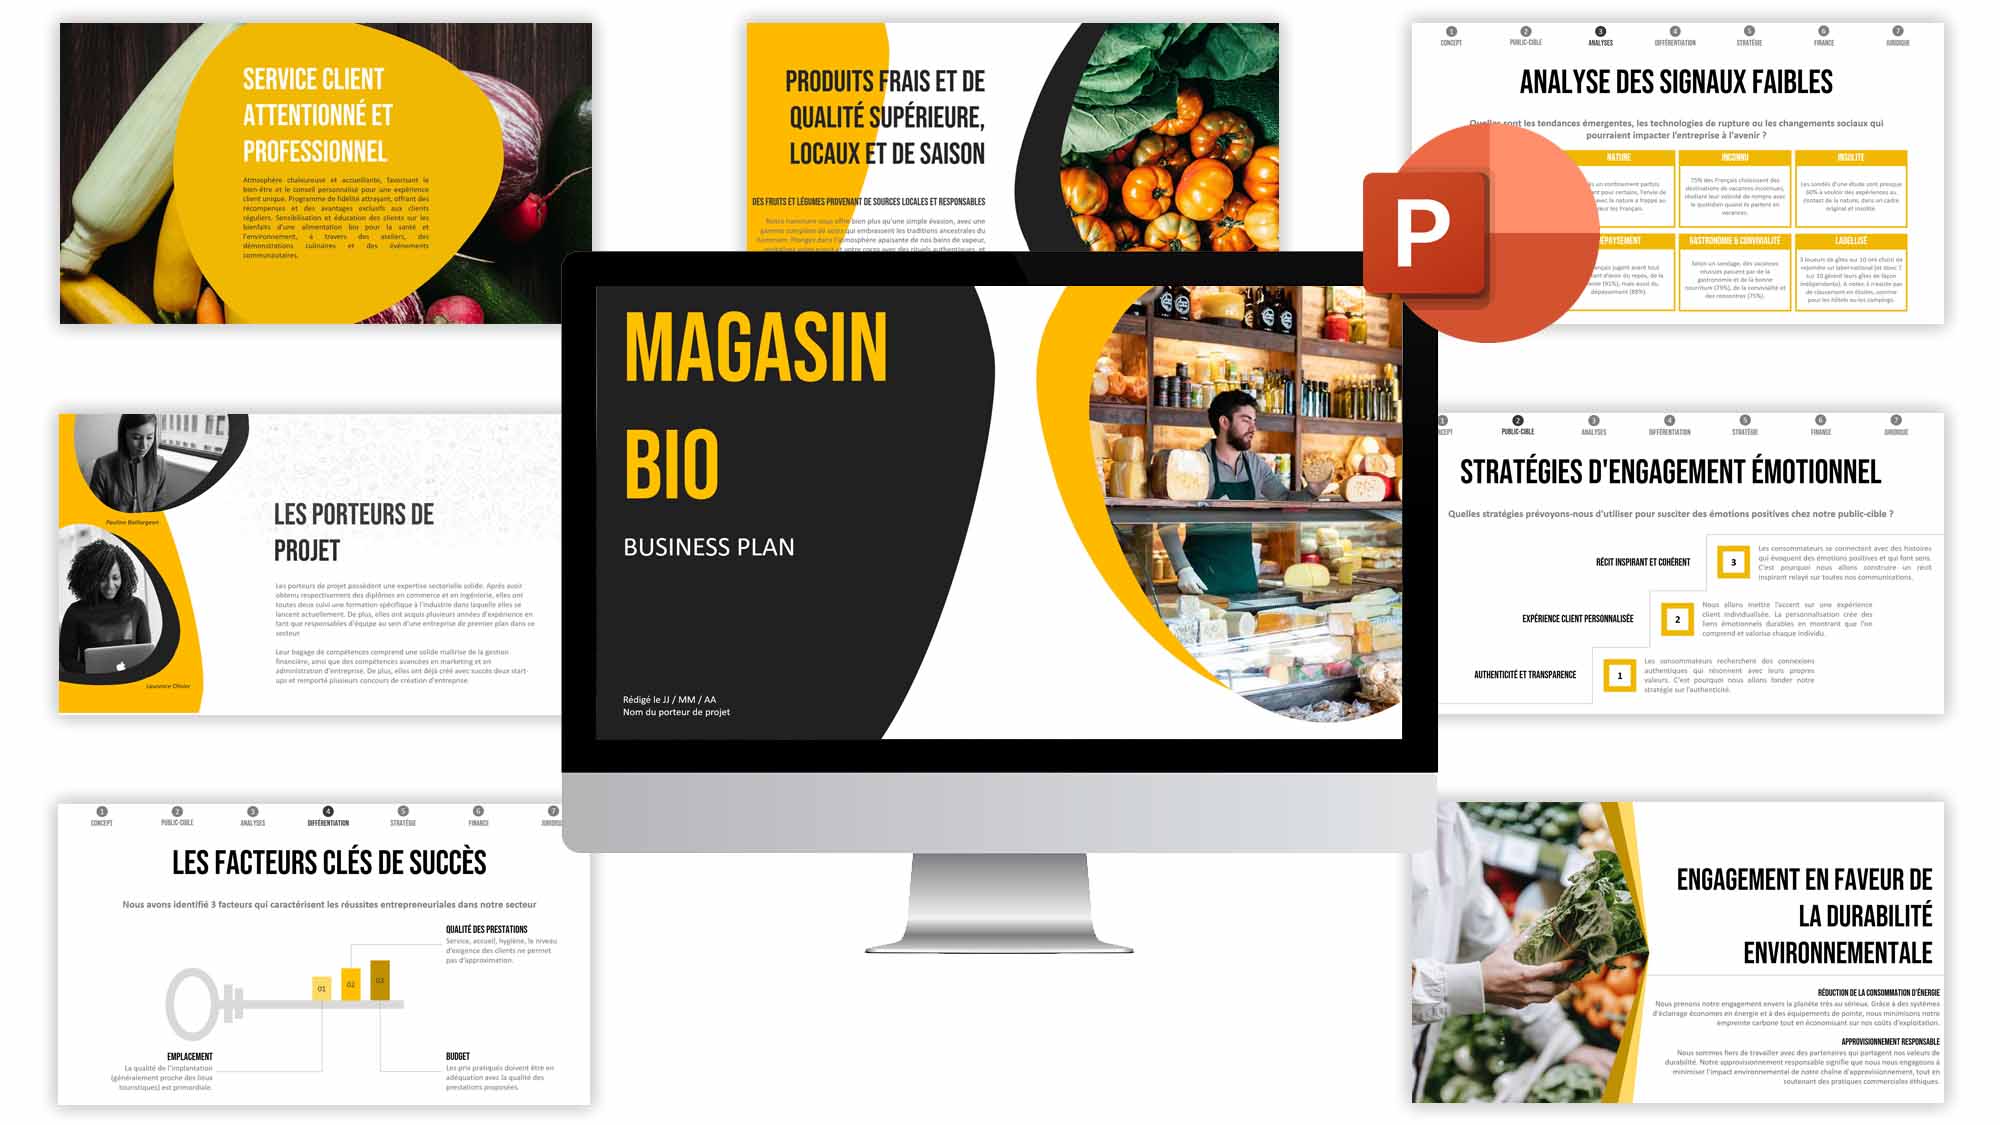 exemple business plan magasin bio